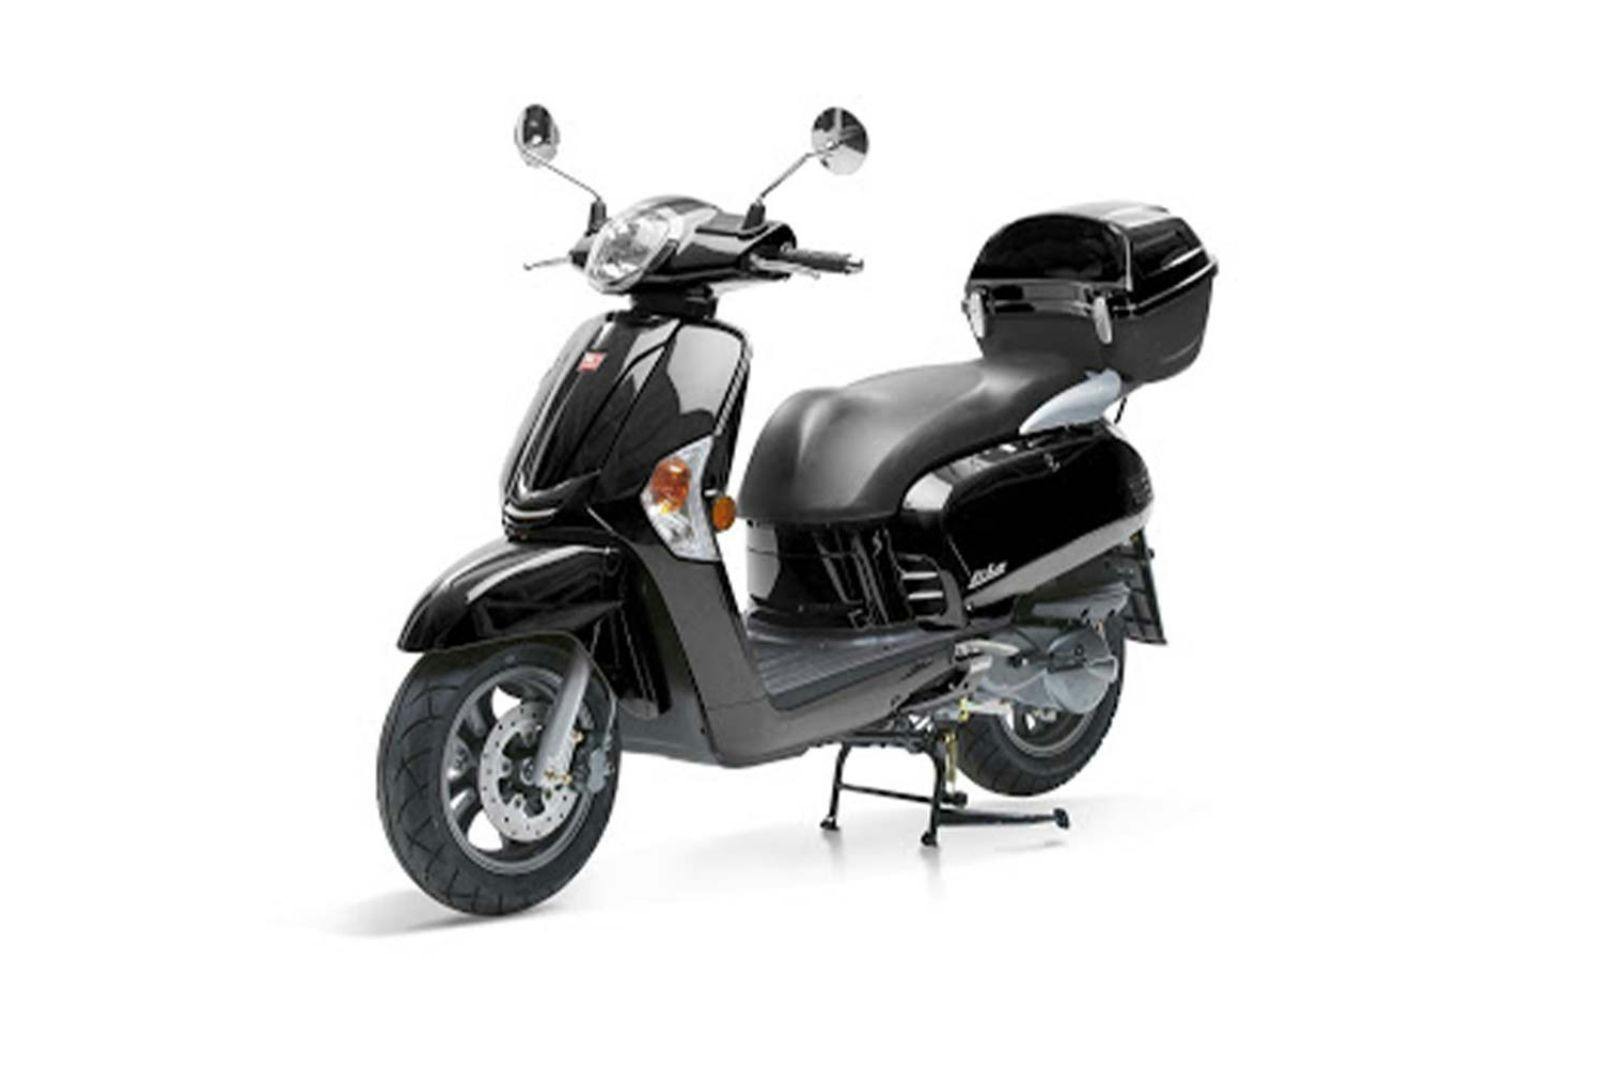 Kymco LIKE 125 in black colour, parked